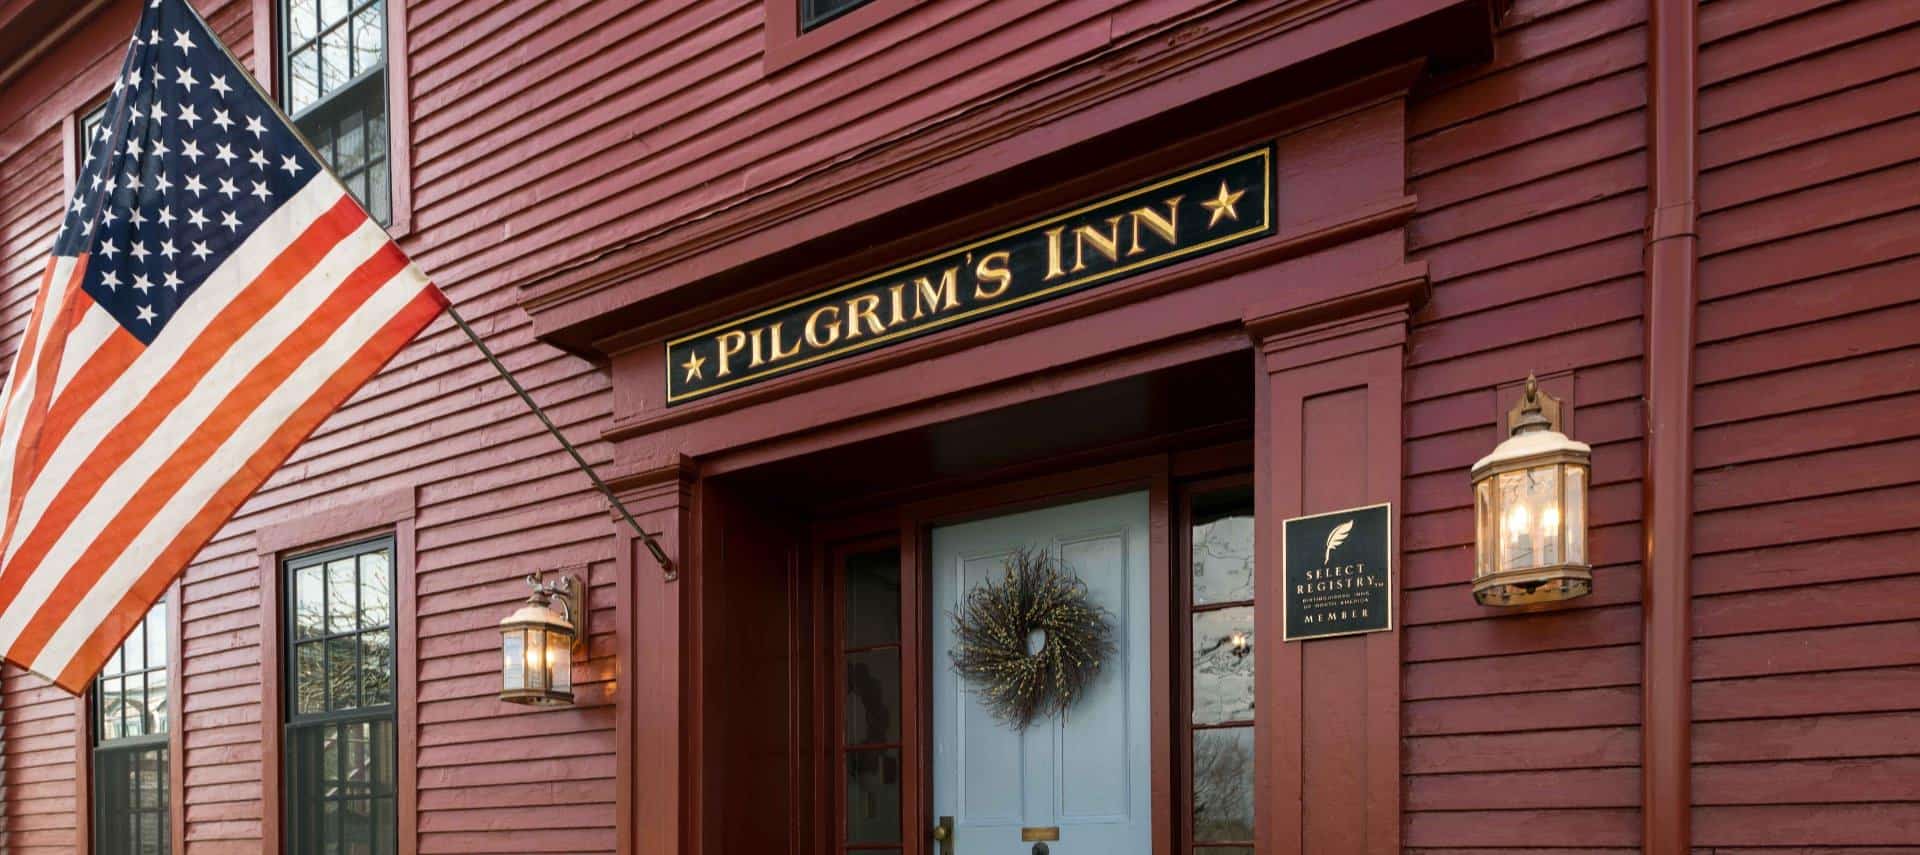 Close up view of the property painted dark red with a white front door, American flag, lantern sconces on each side of the entry, and large sign showing Pilgrim's Inn